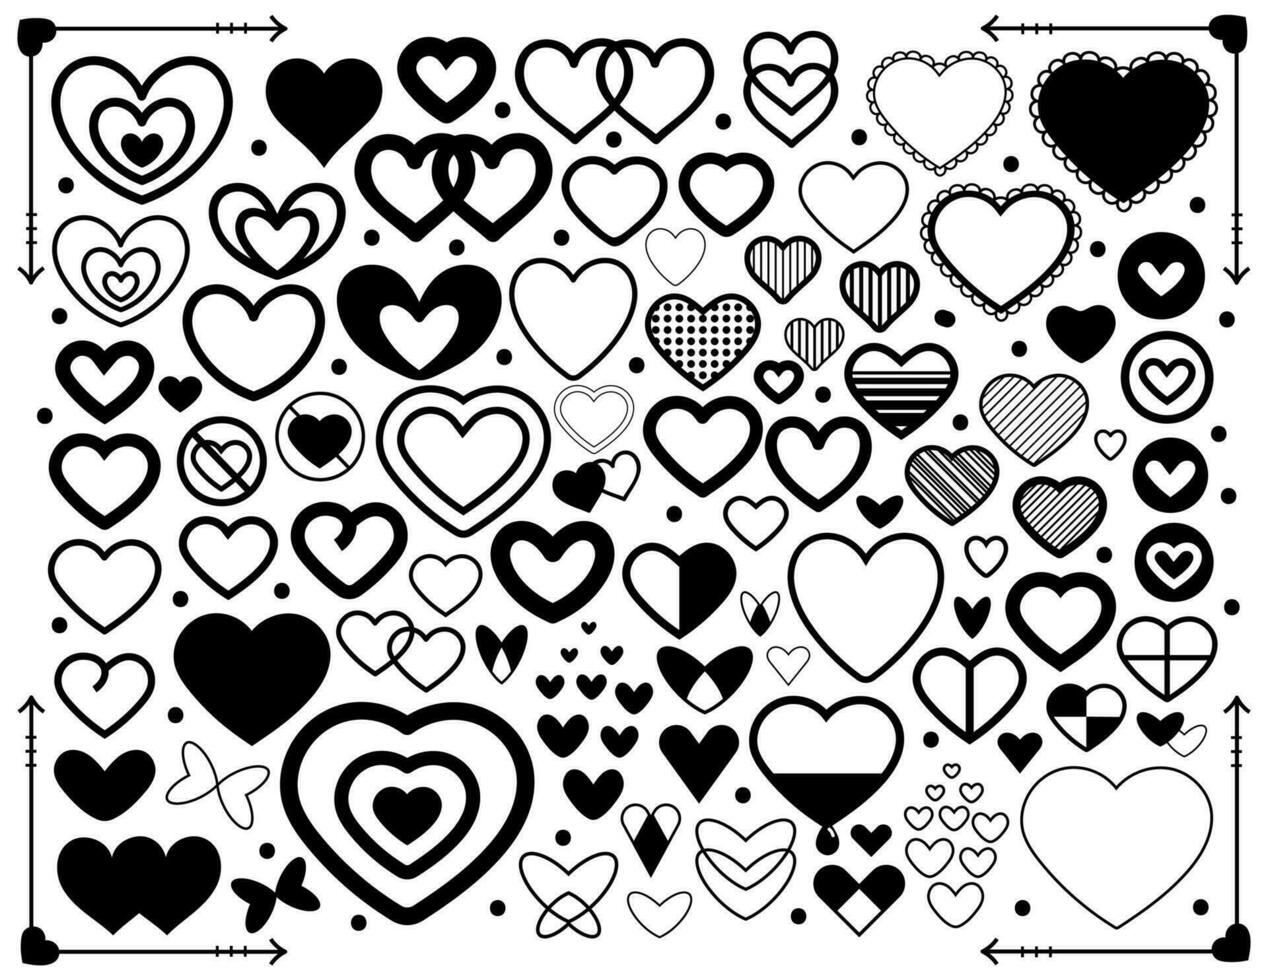 Black and white set of hearts. Simple hand drawn heart icons. Vector illustration.